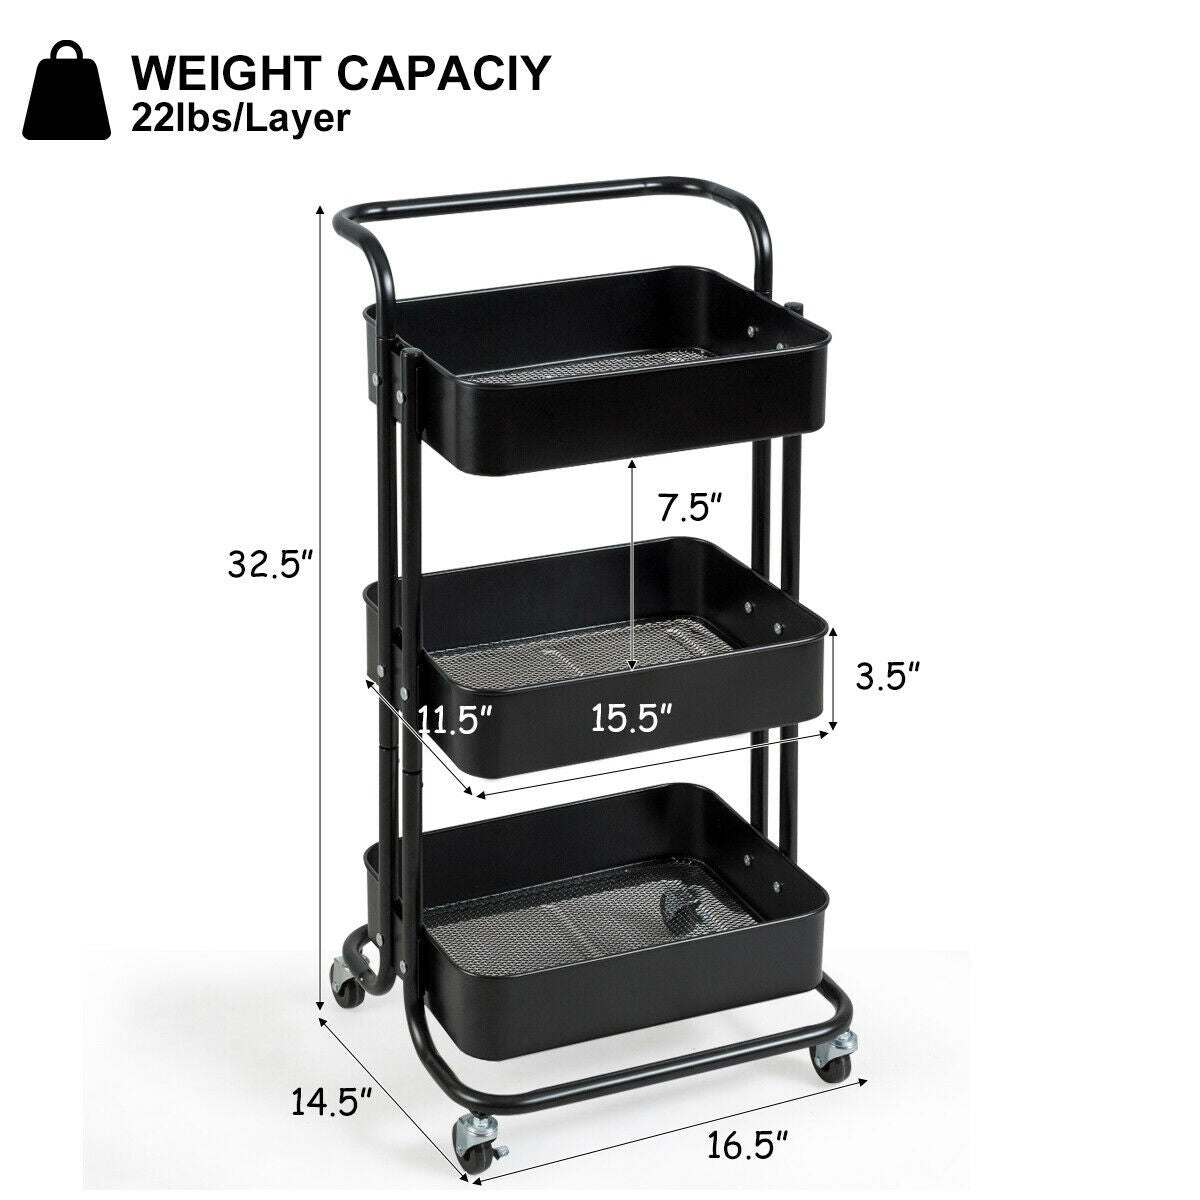 Giantex 3-Tier Rolling Cart, Lockable Casters and 3 Mesh Storage Baskets